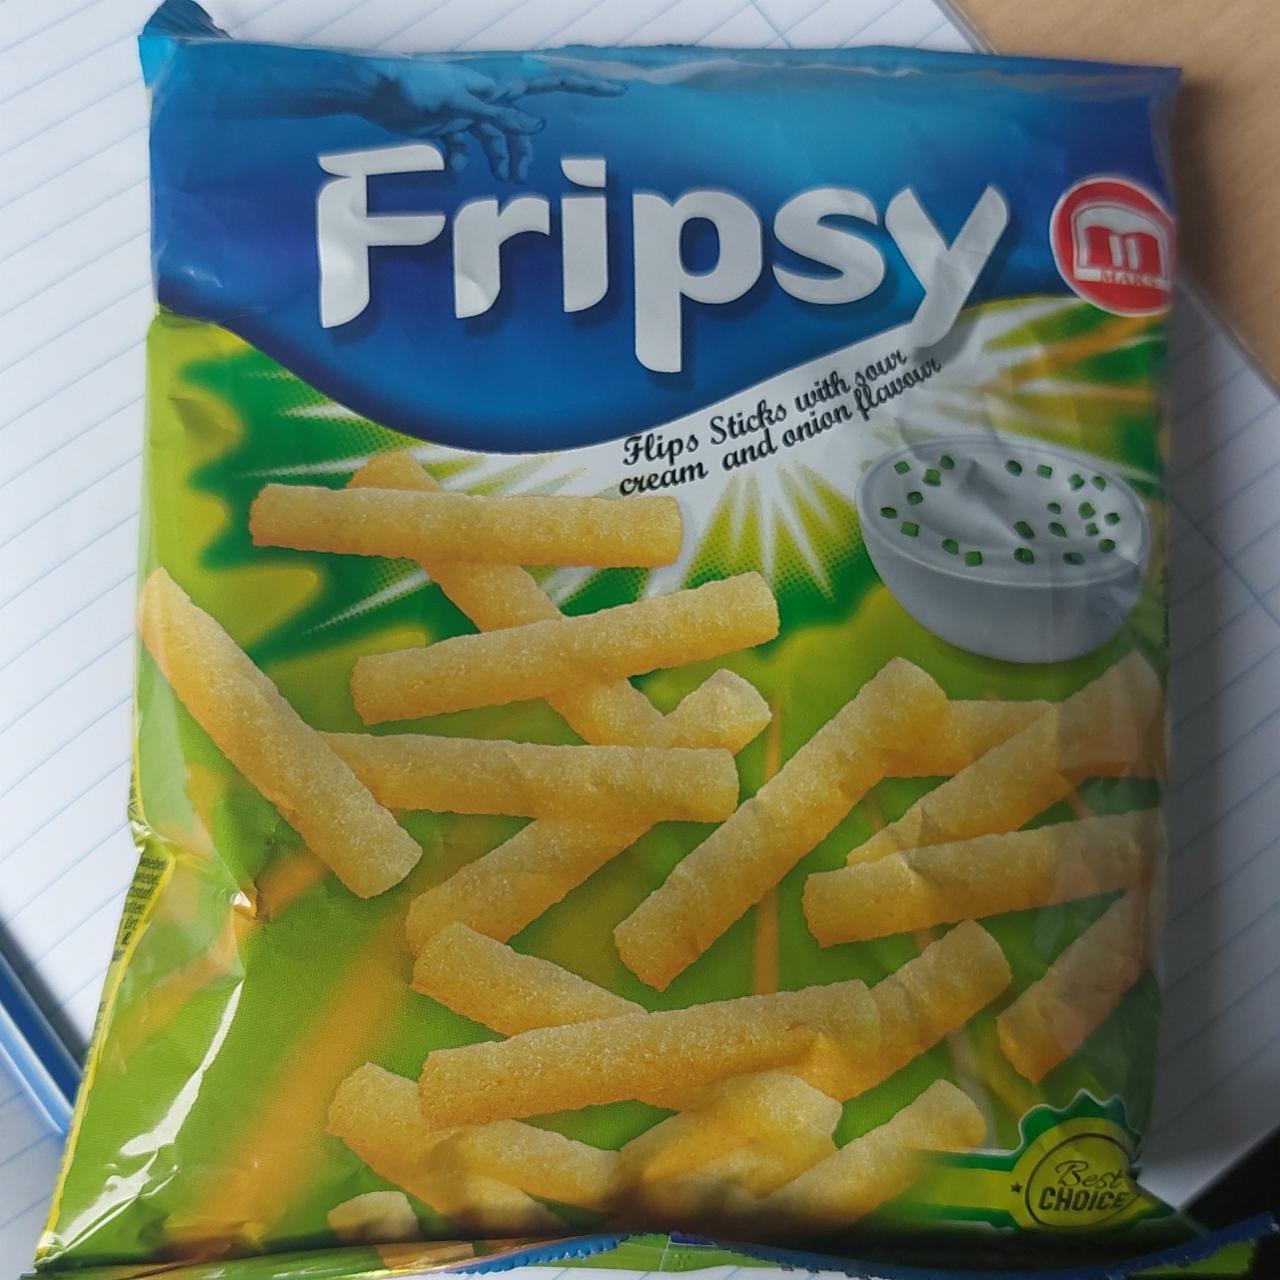 Képek - Fripsy Flips sticks with sour cream and onion flavour